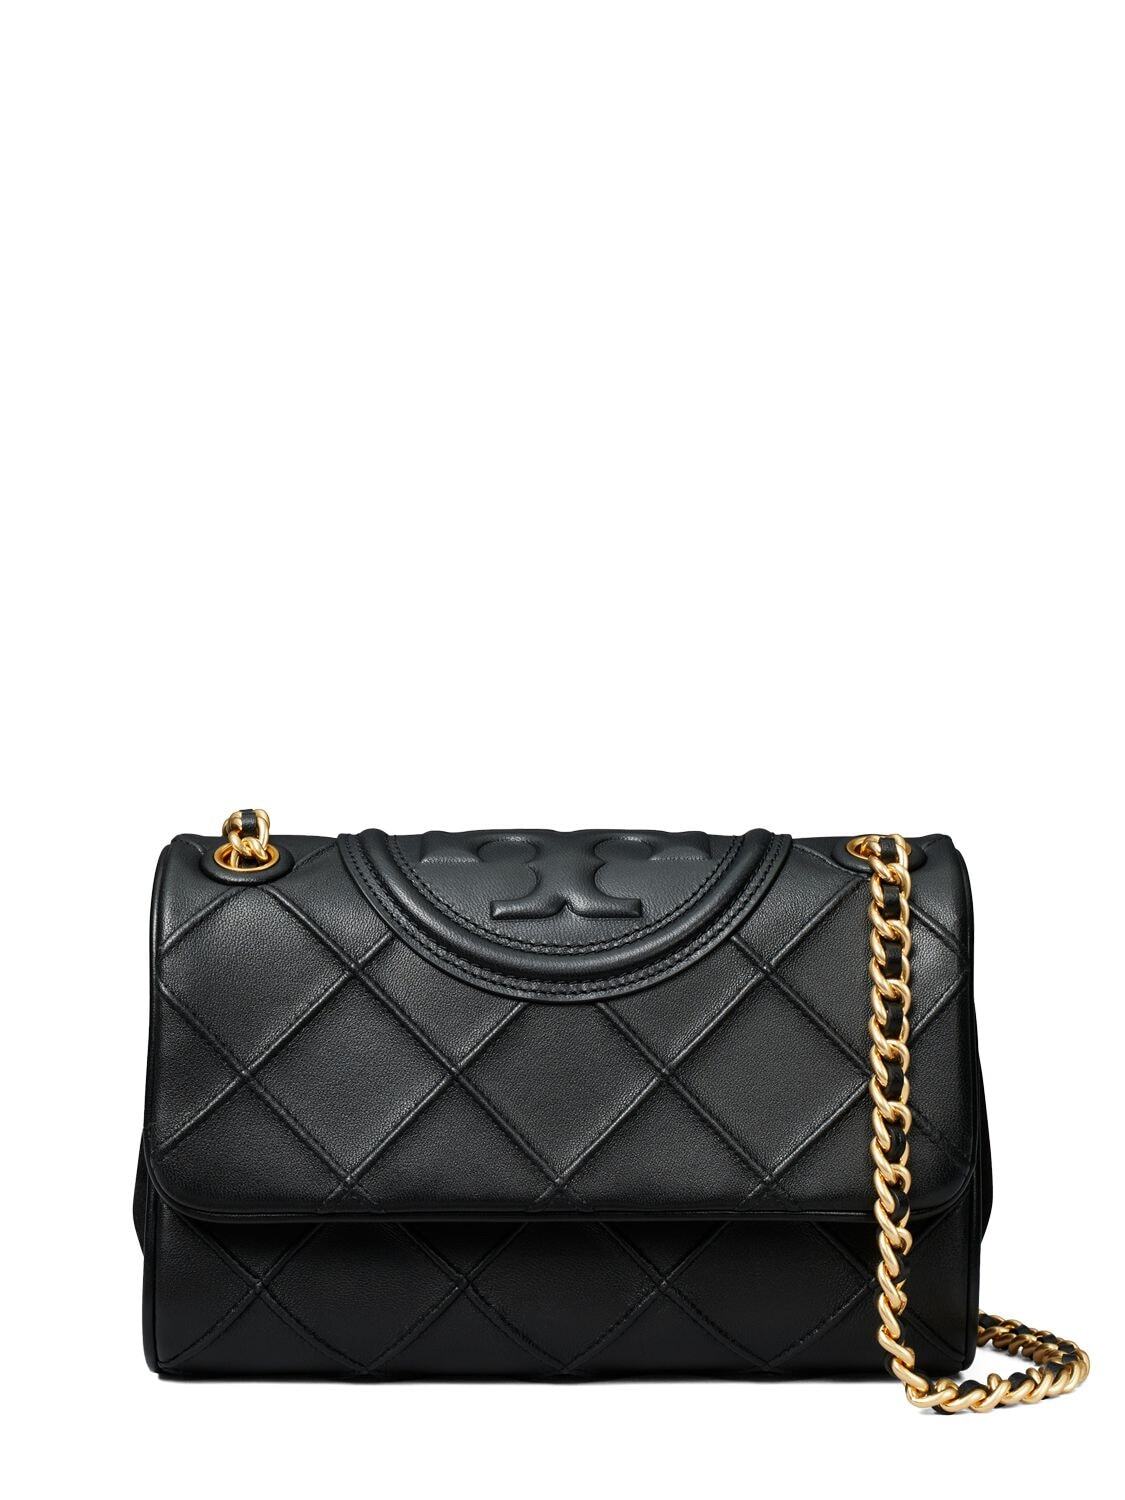 TORY BURCH Small Fleming Soft Convertible Bag in black